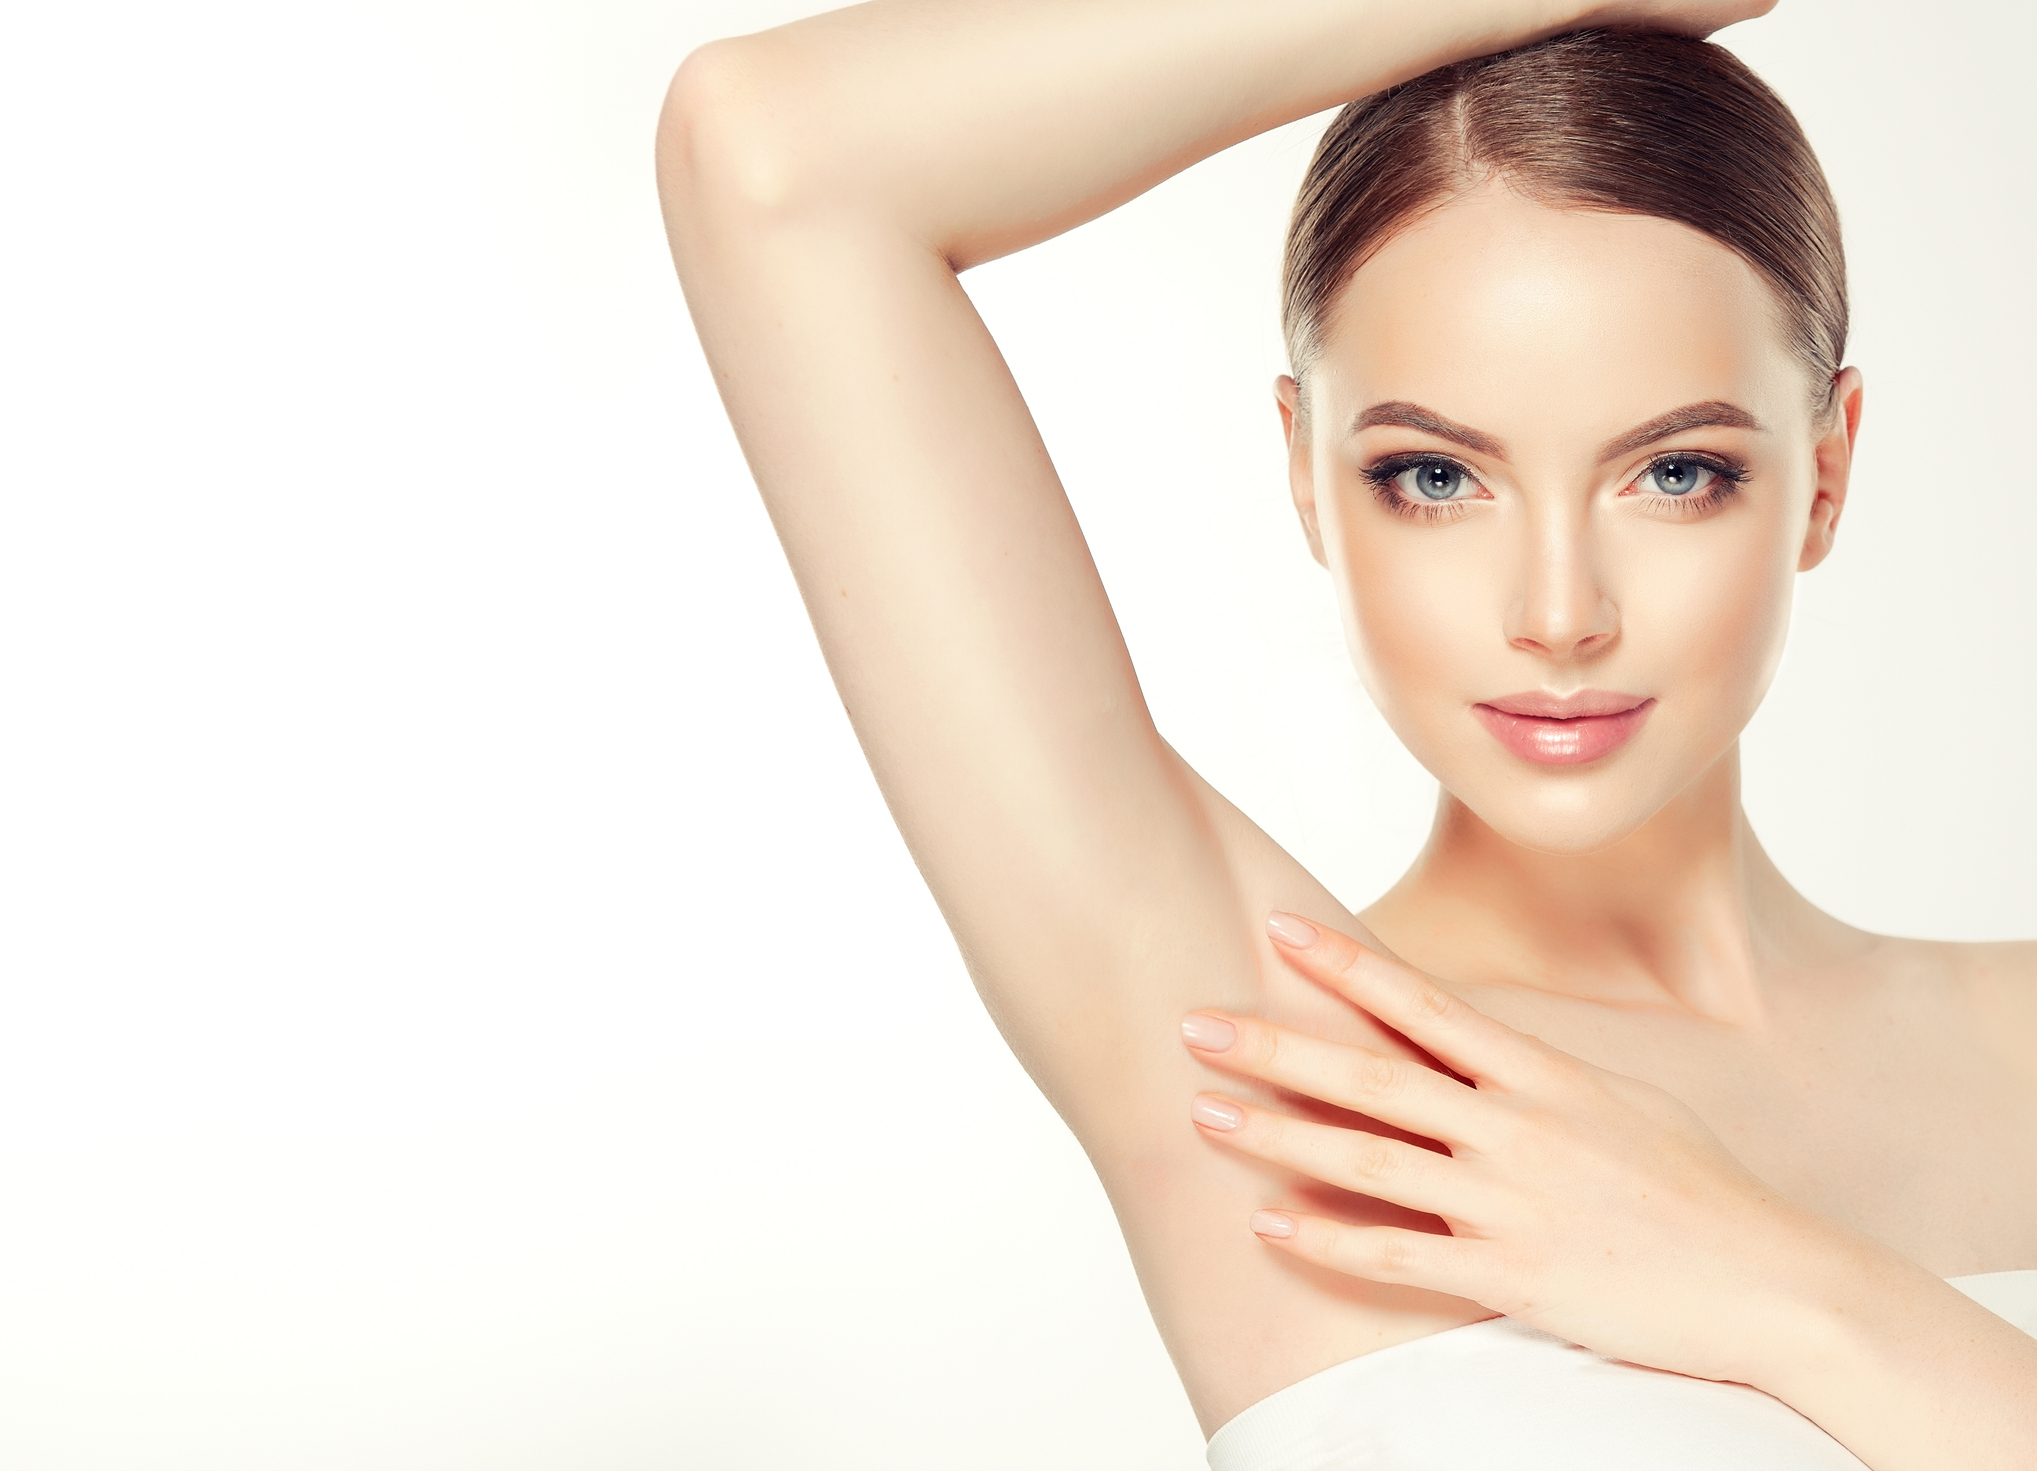 Gorgeous, young, brown haired woman with clean fresh skin and hair gathered in neat hairstyle is touching tenderly clean shaved armpit. Soft make up and light smile on the perfect face. Depilation, cosmetology and beauty technologies.